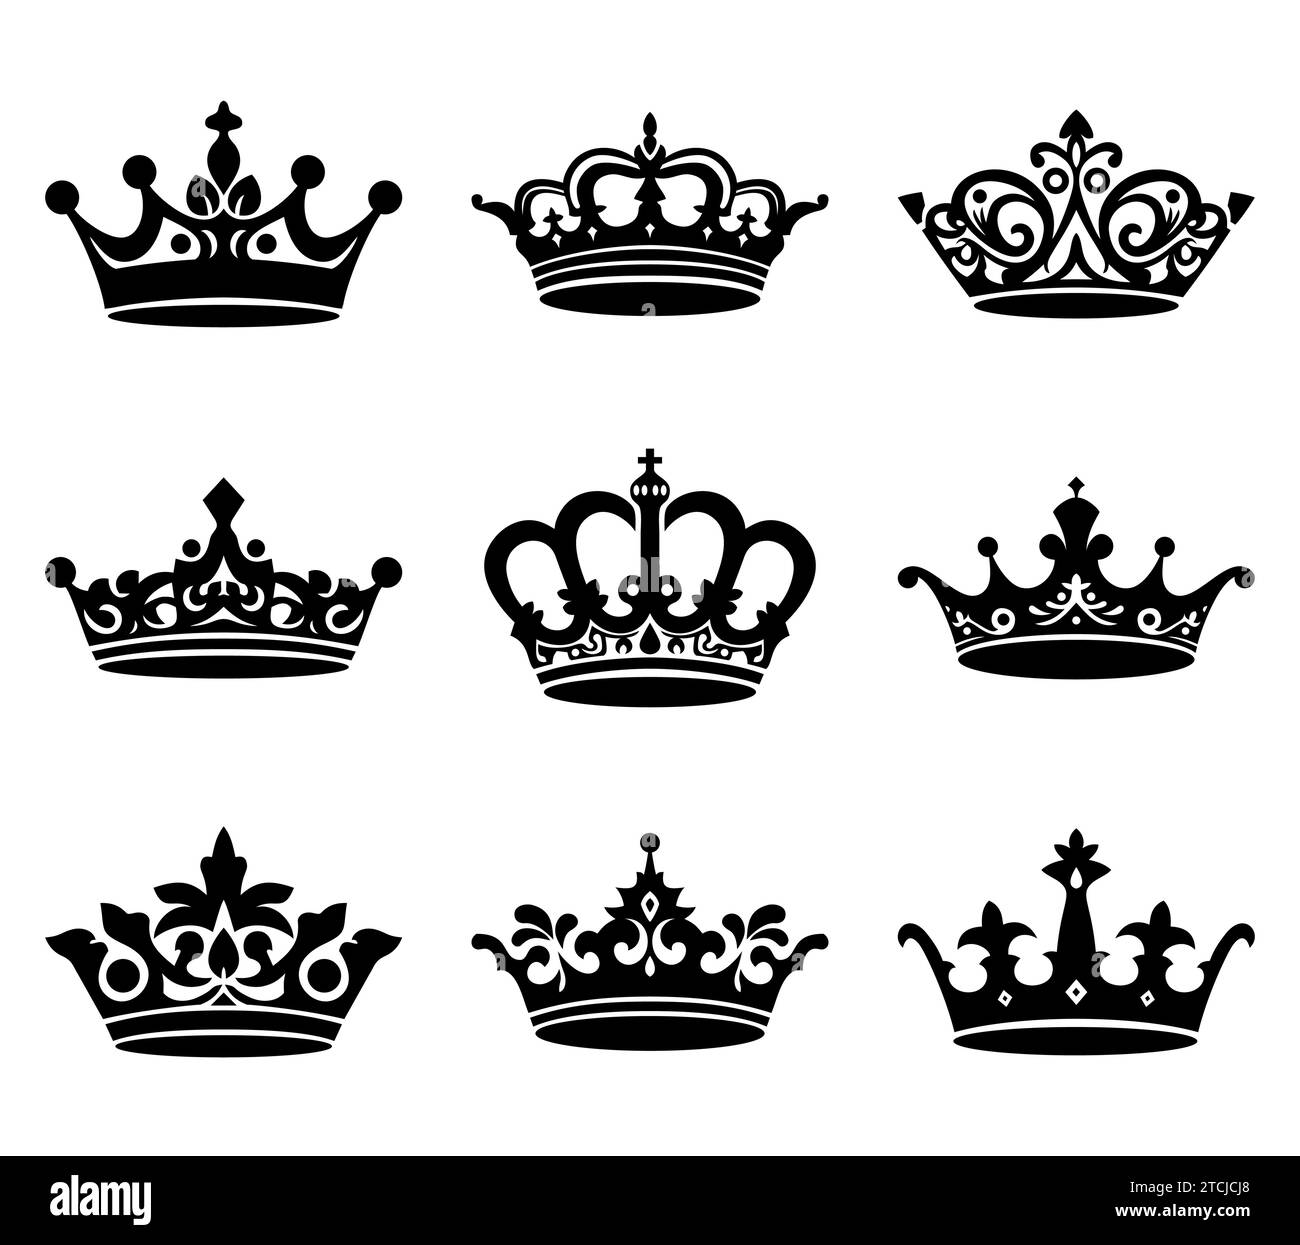 Set of black crown icons silhouette. Collection Coat of arms and royal symbols. Vector illustration Stock Vector